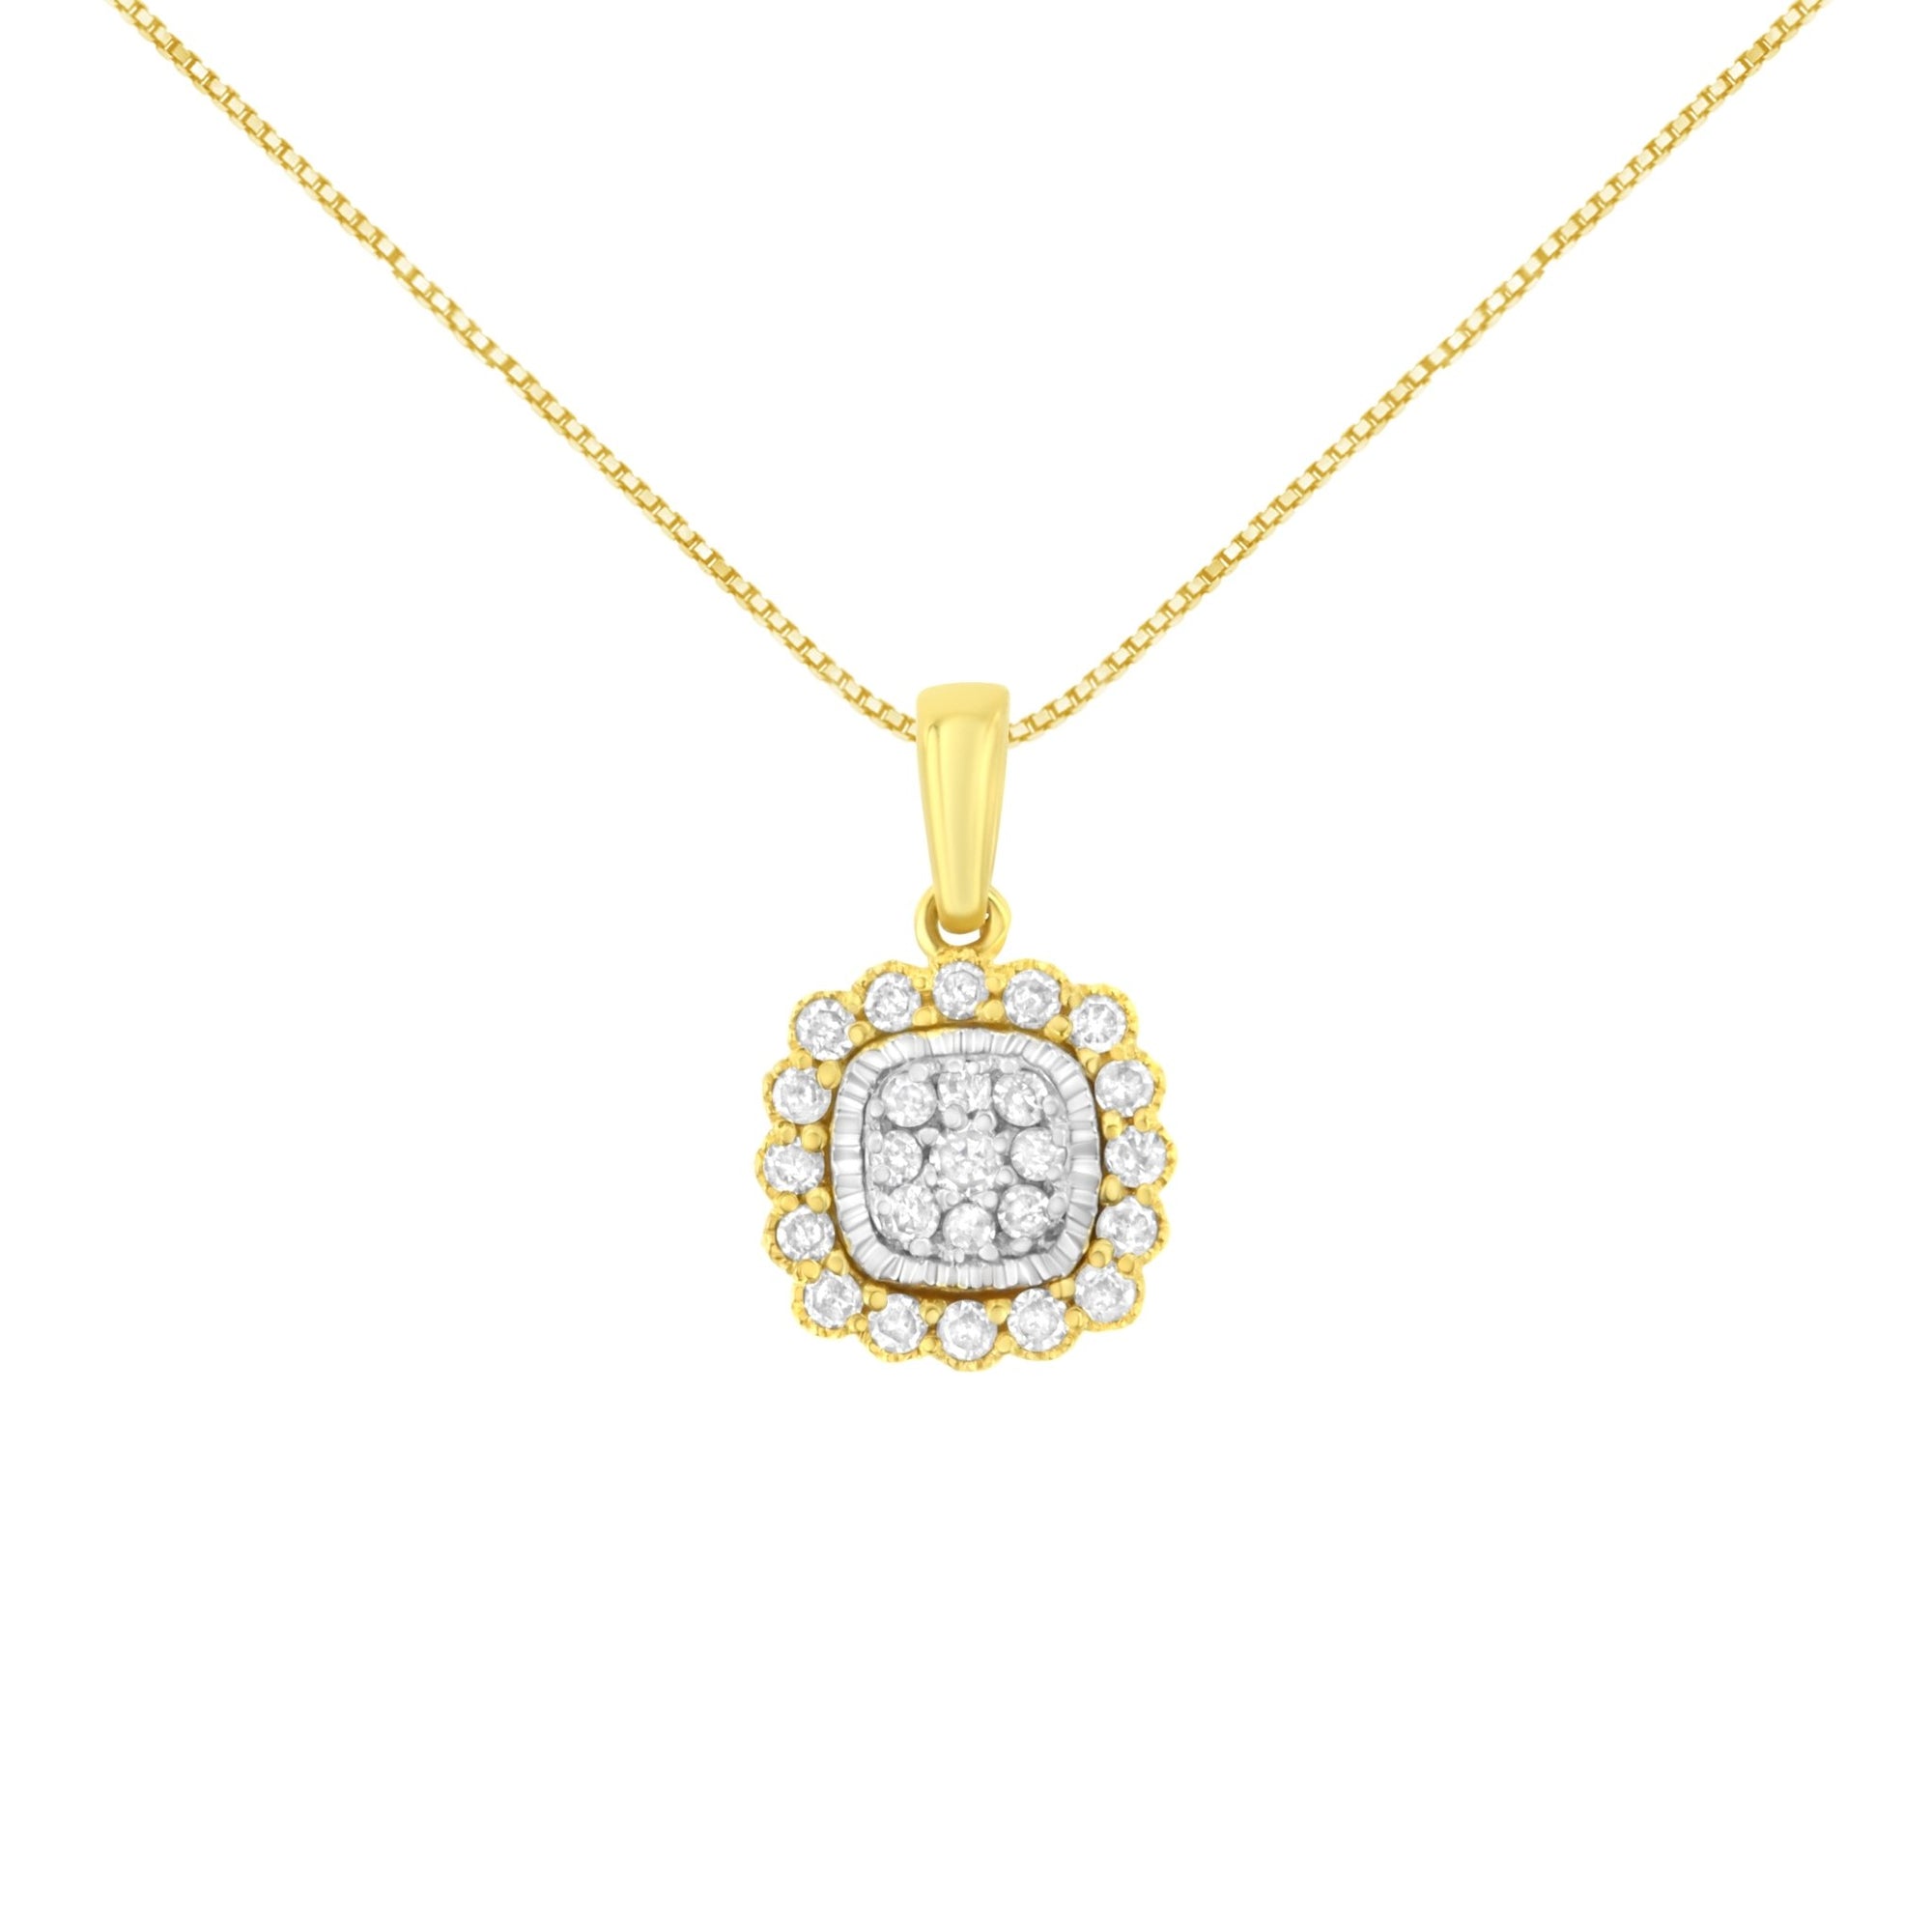 10K Yellow Gold Plated .925 Sterling Silver 1/4 Cttw Diamond 18" Pendant Necklace (I-J Color, I1-I2 Clarity) - LinkagejewelrydesignLinkagejewelrydesign